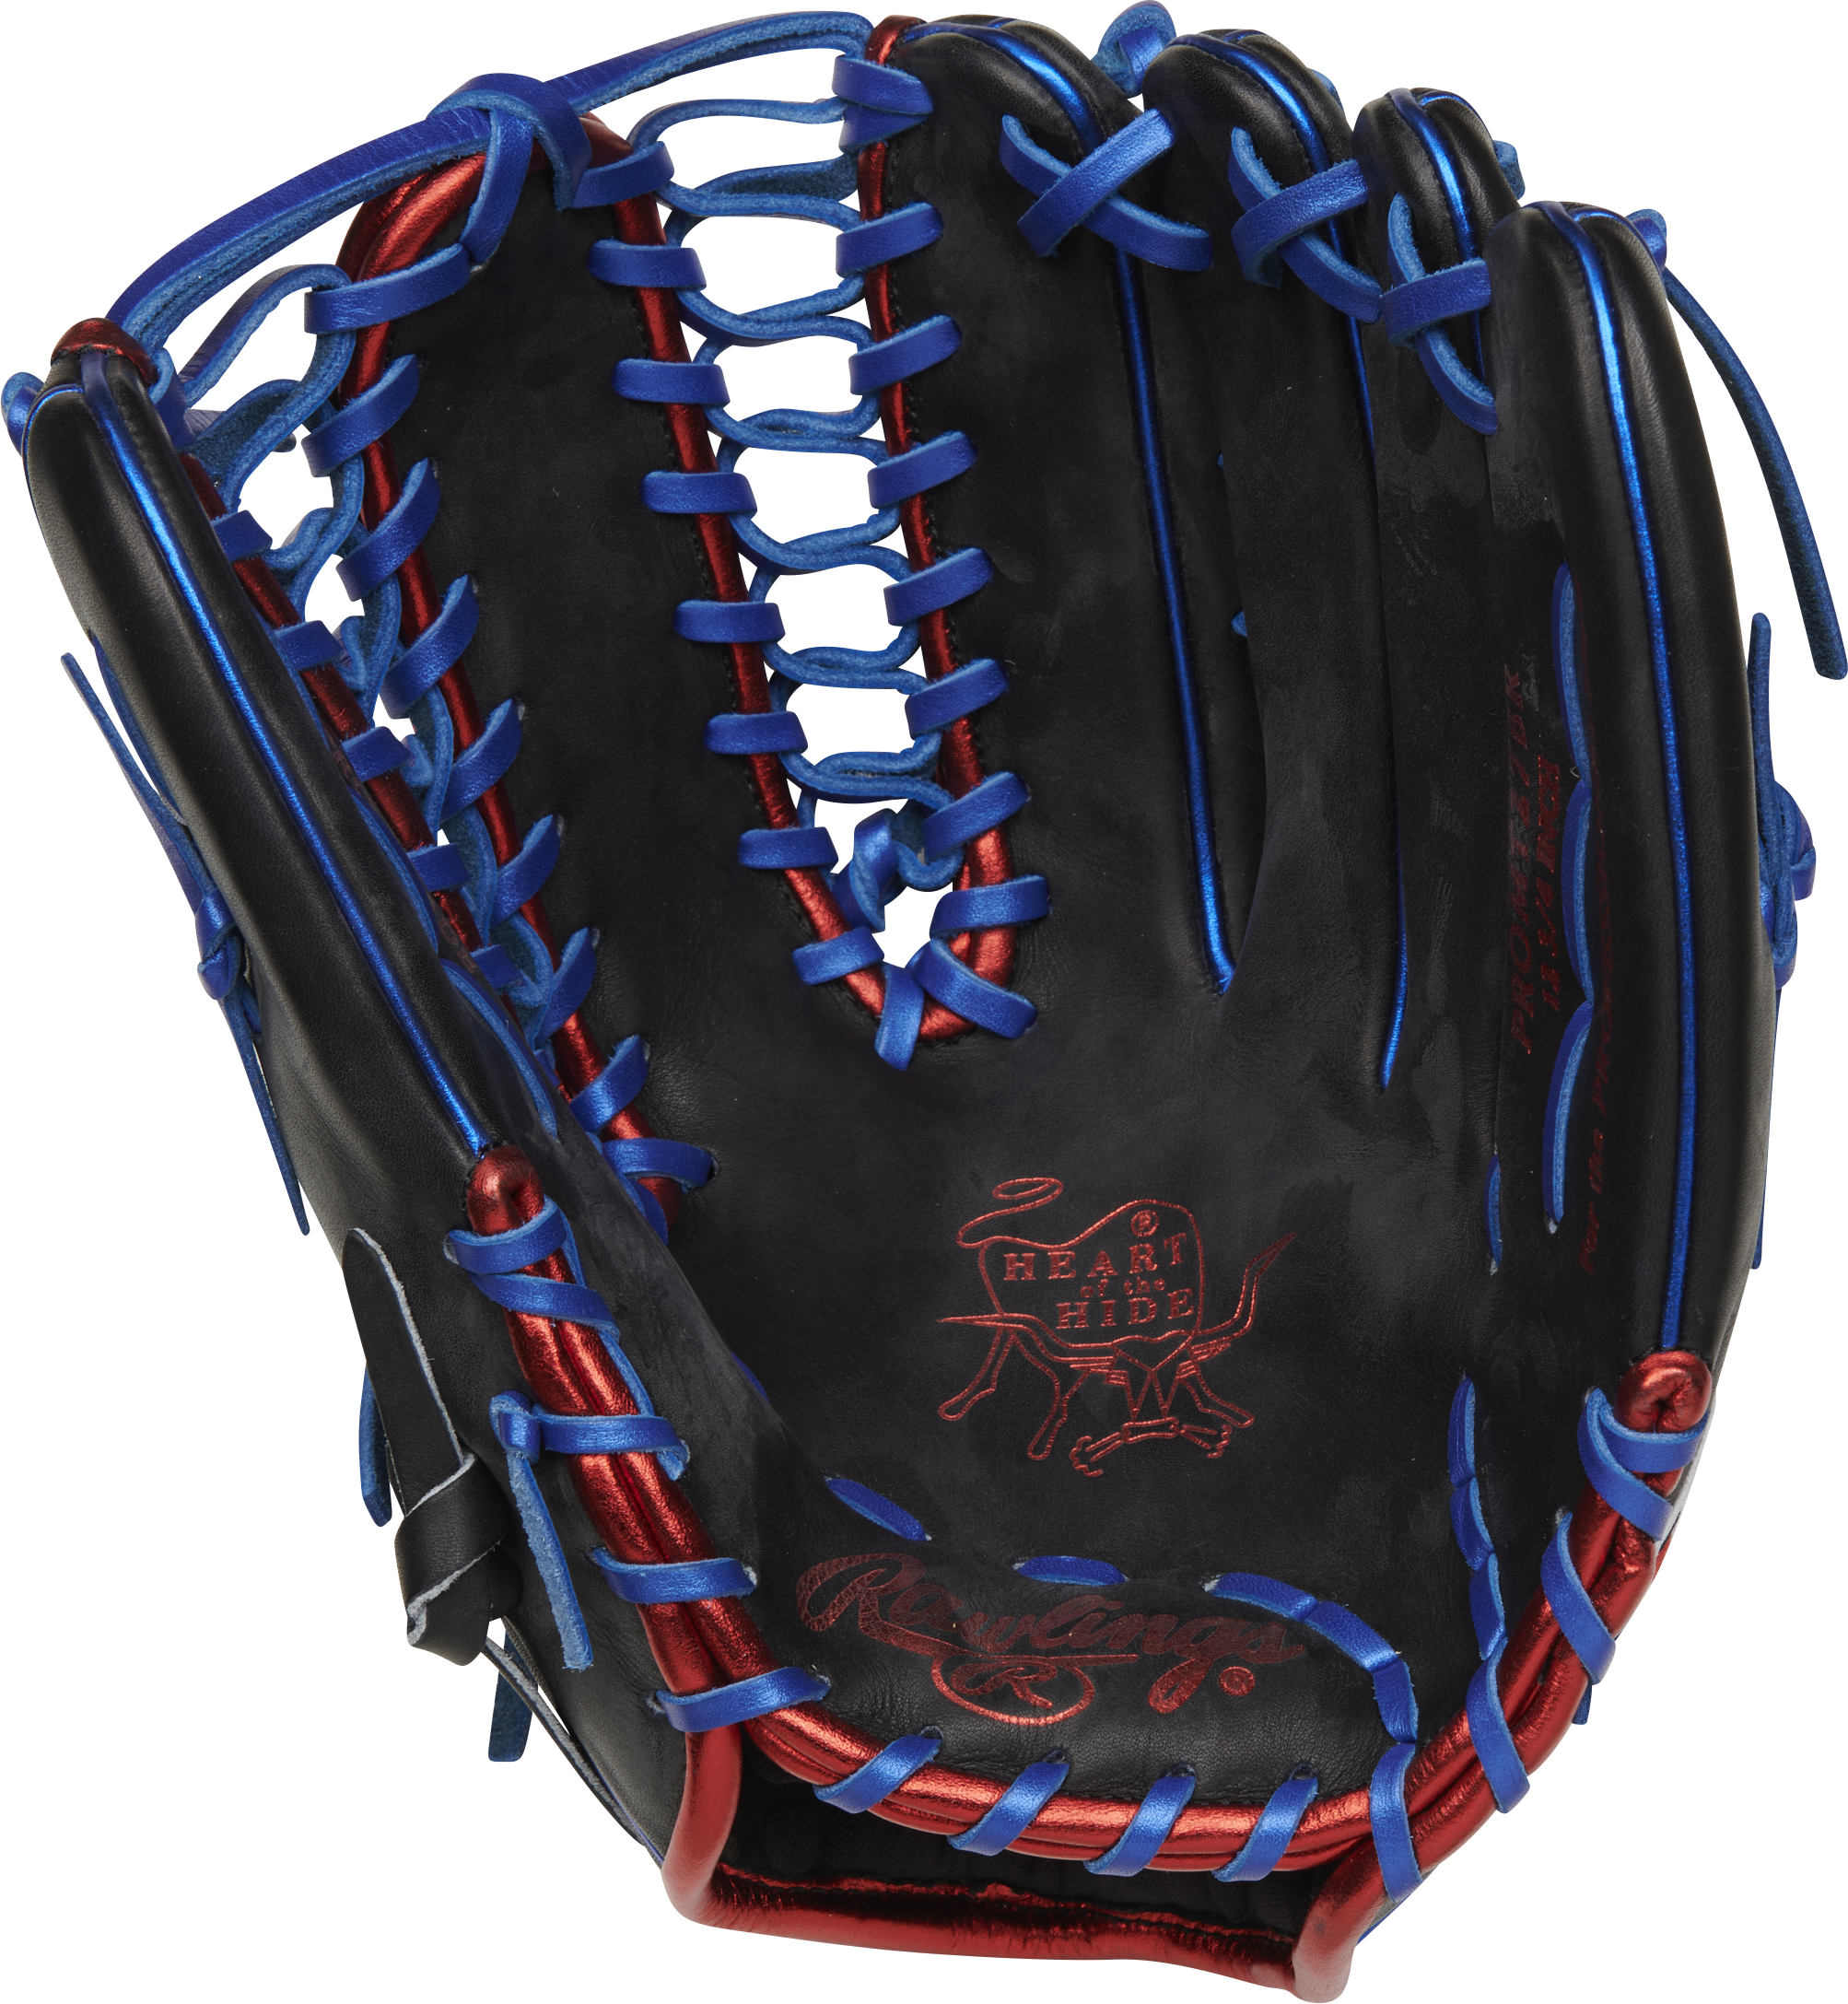 Rawlings ColorSync 7.0 12.75" Outfield Glove